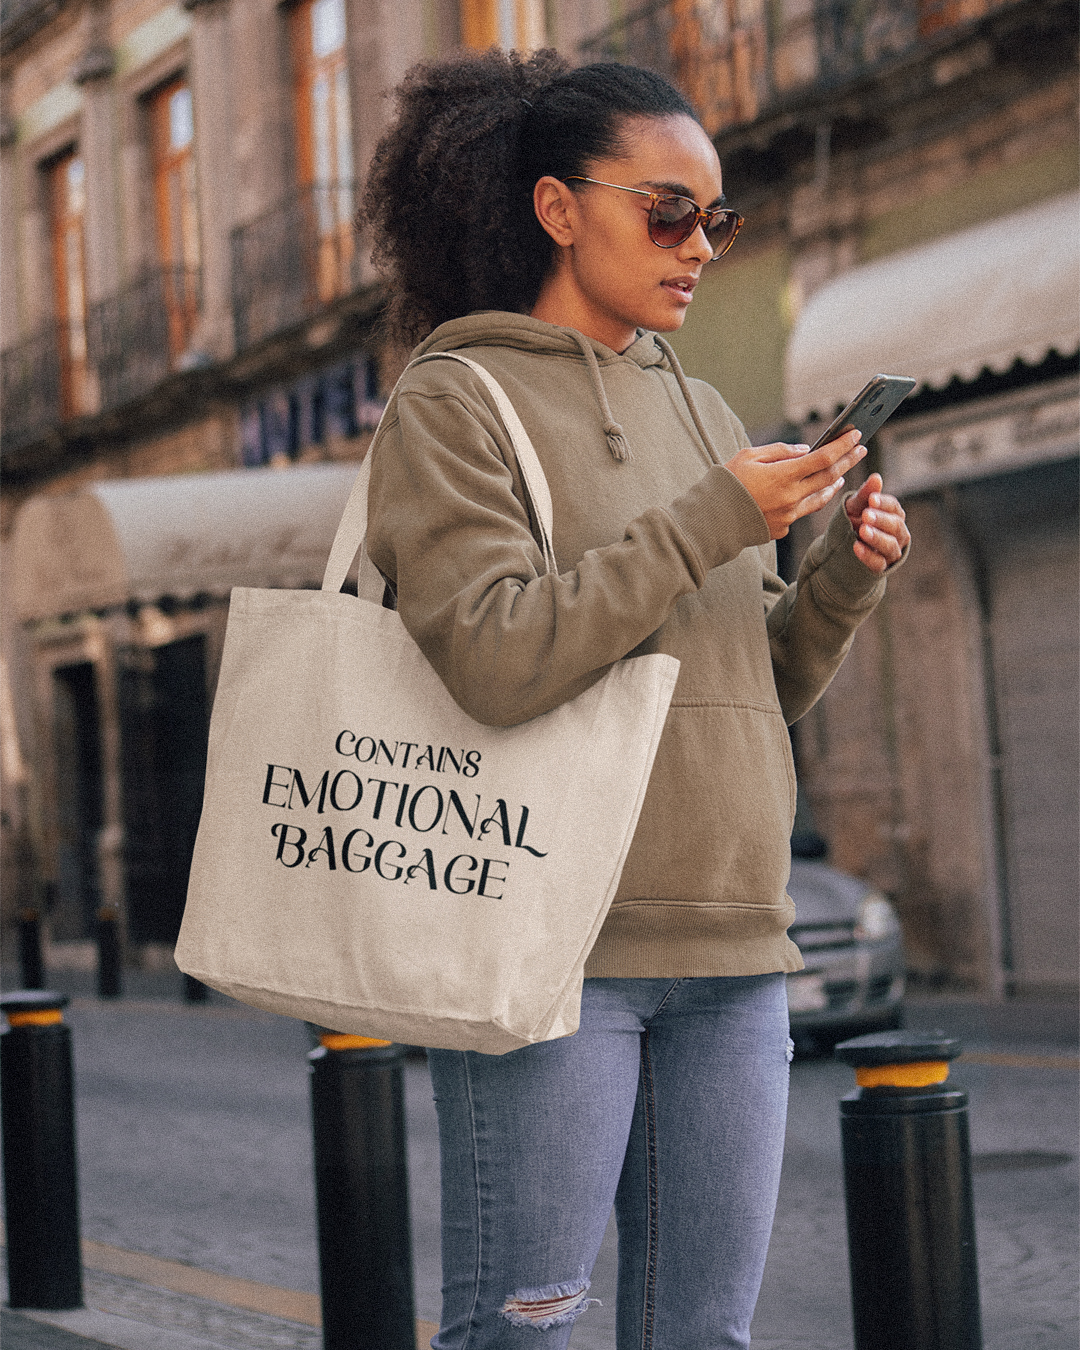 Contains Emotional Baggage Tote Bag - Funny Tote Bags Shopper - Contains Emotional Baggage Tote Bag Shopper